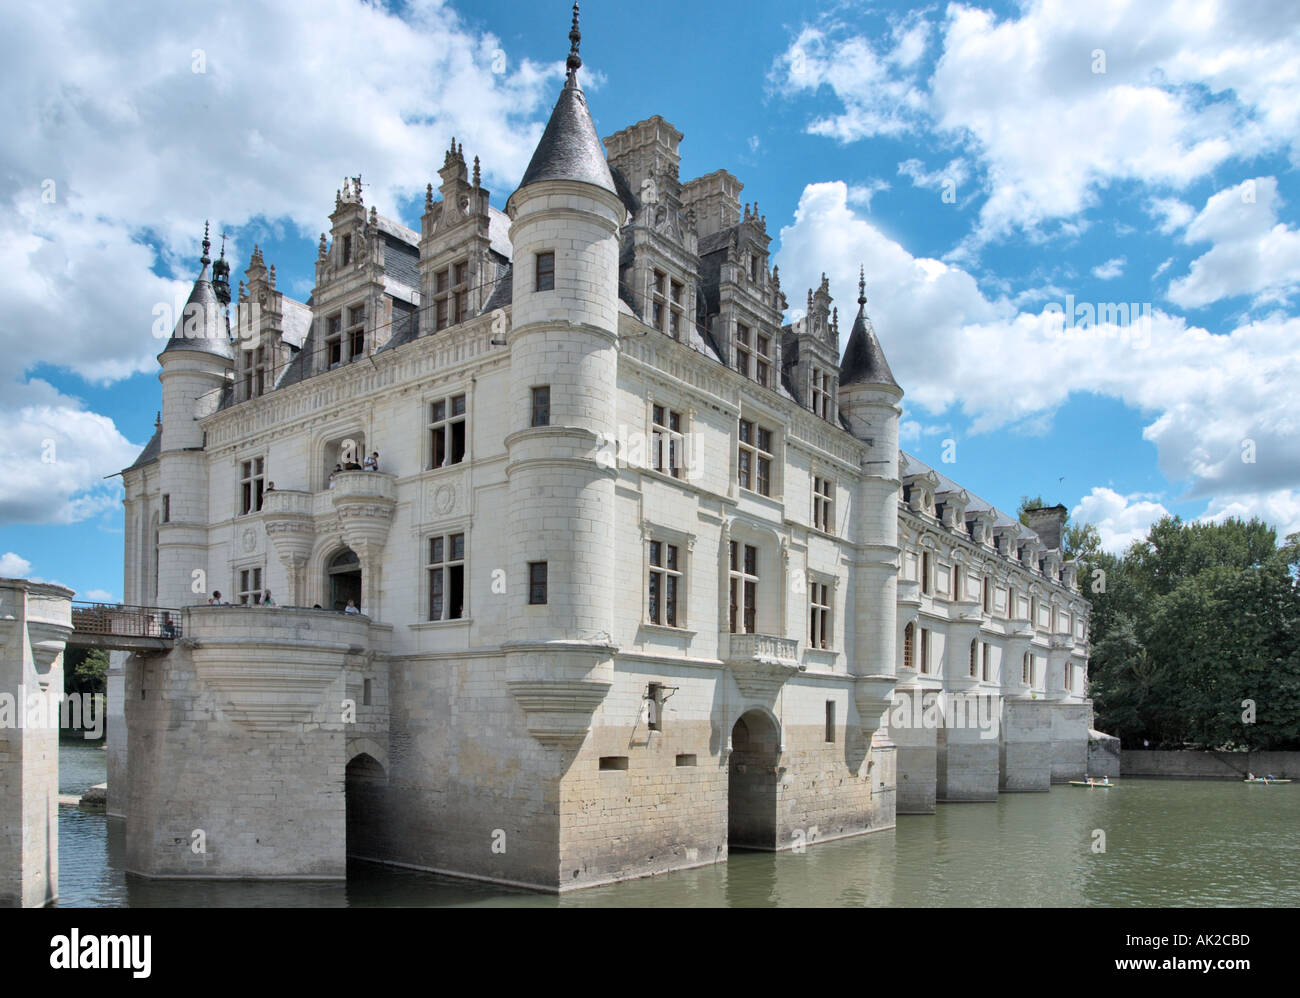 The Chateau de Chenonceau on the River Cher, The Loire Valley, France Stock Photo